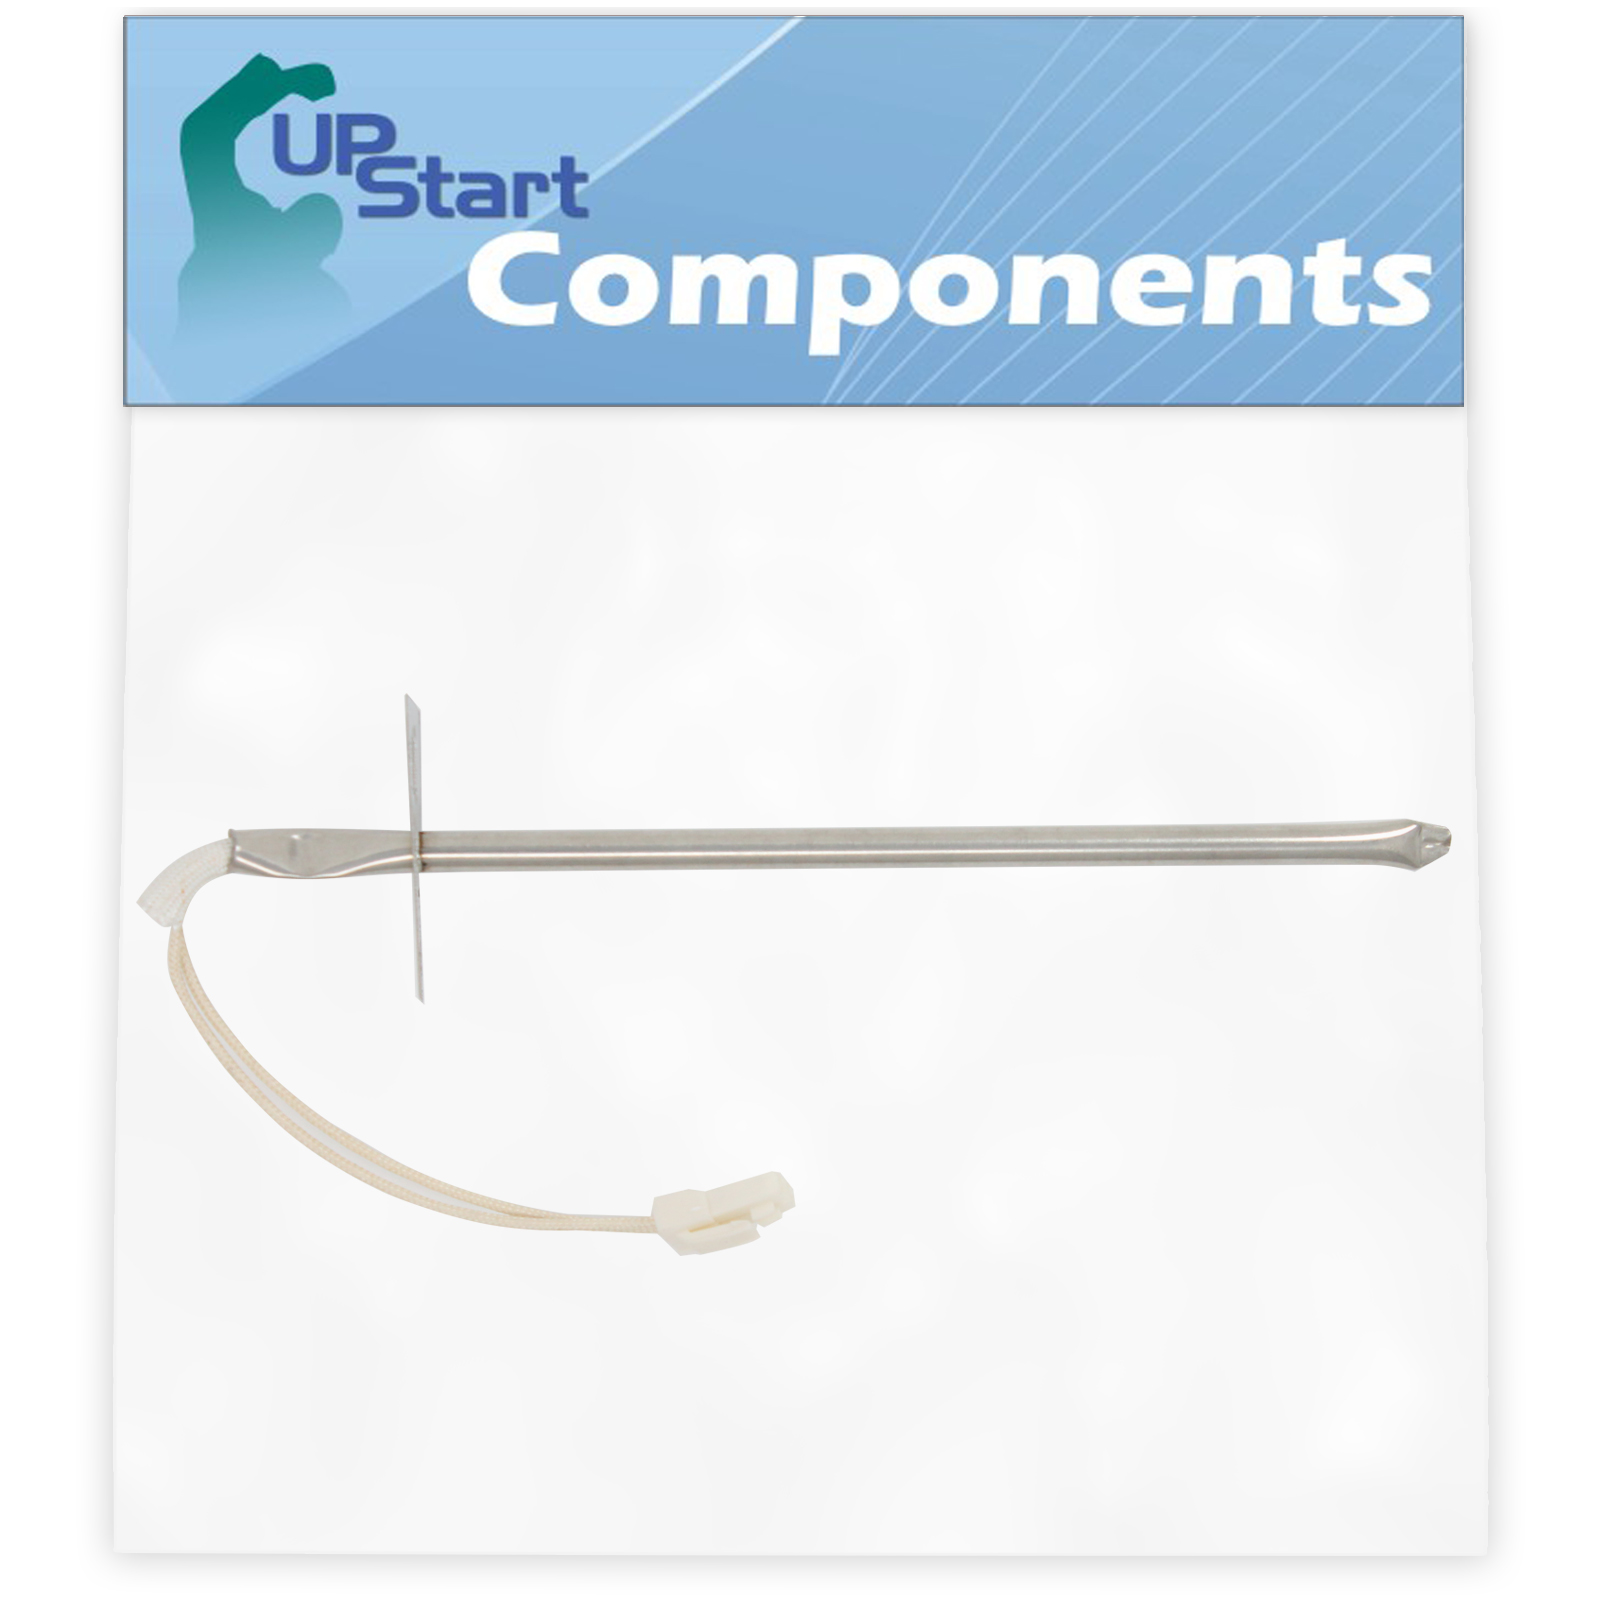 UpStart Components W10181986 Oven Sensor Replacement for KitchenAid KERS202BBL0 Range / Cooktop / Oven